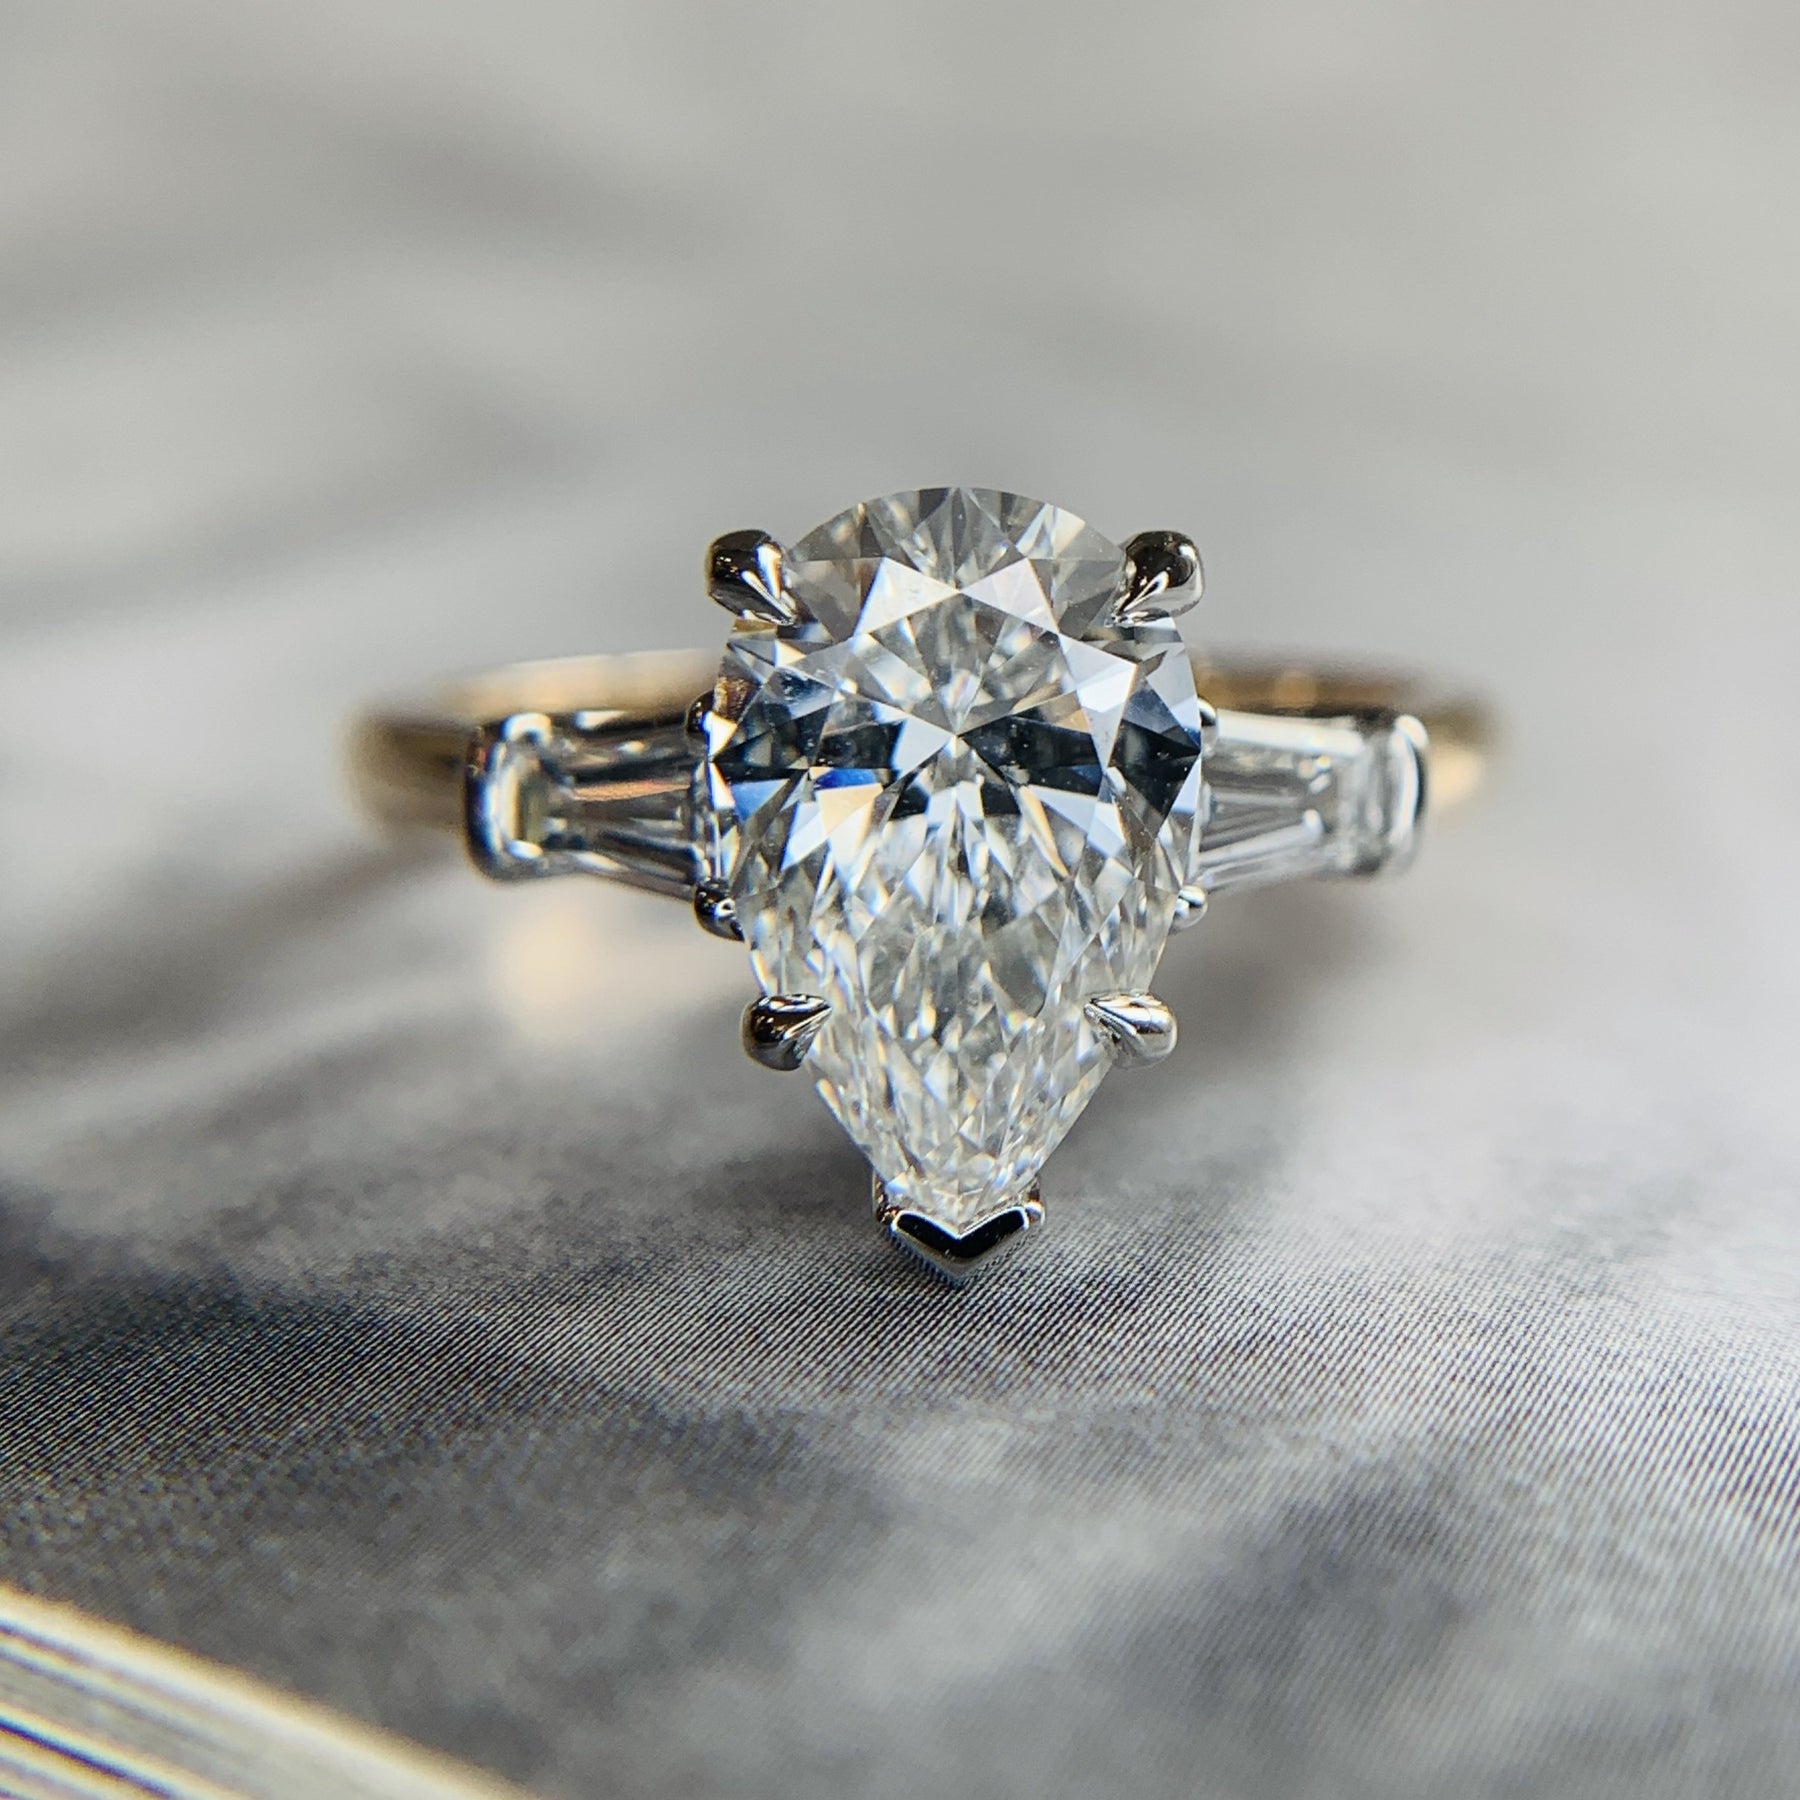 Most-Viewed Ready to Ship Engagement Rings – Unique Engagement Rings ...